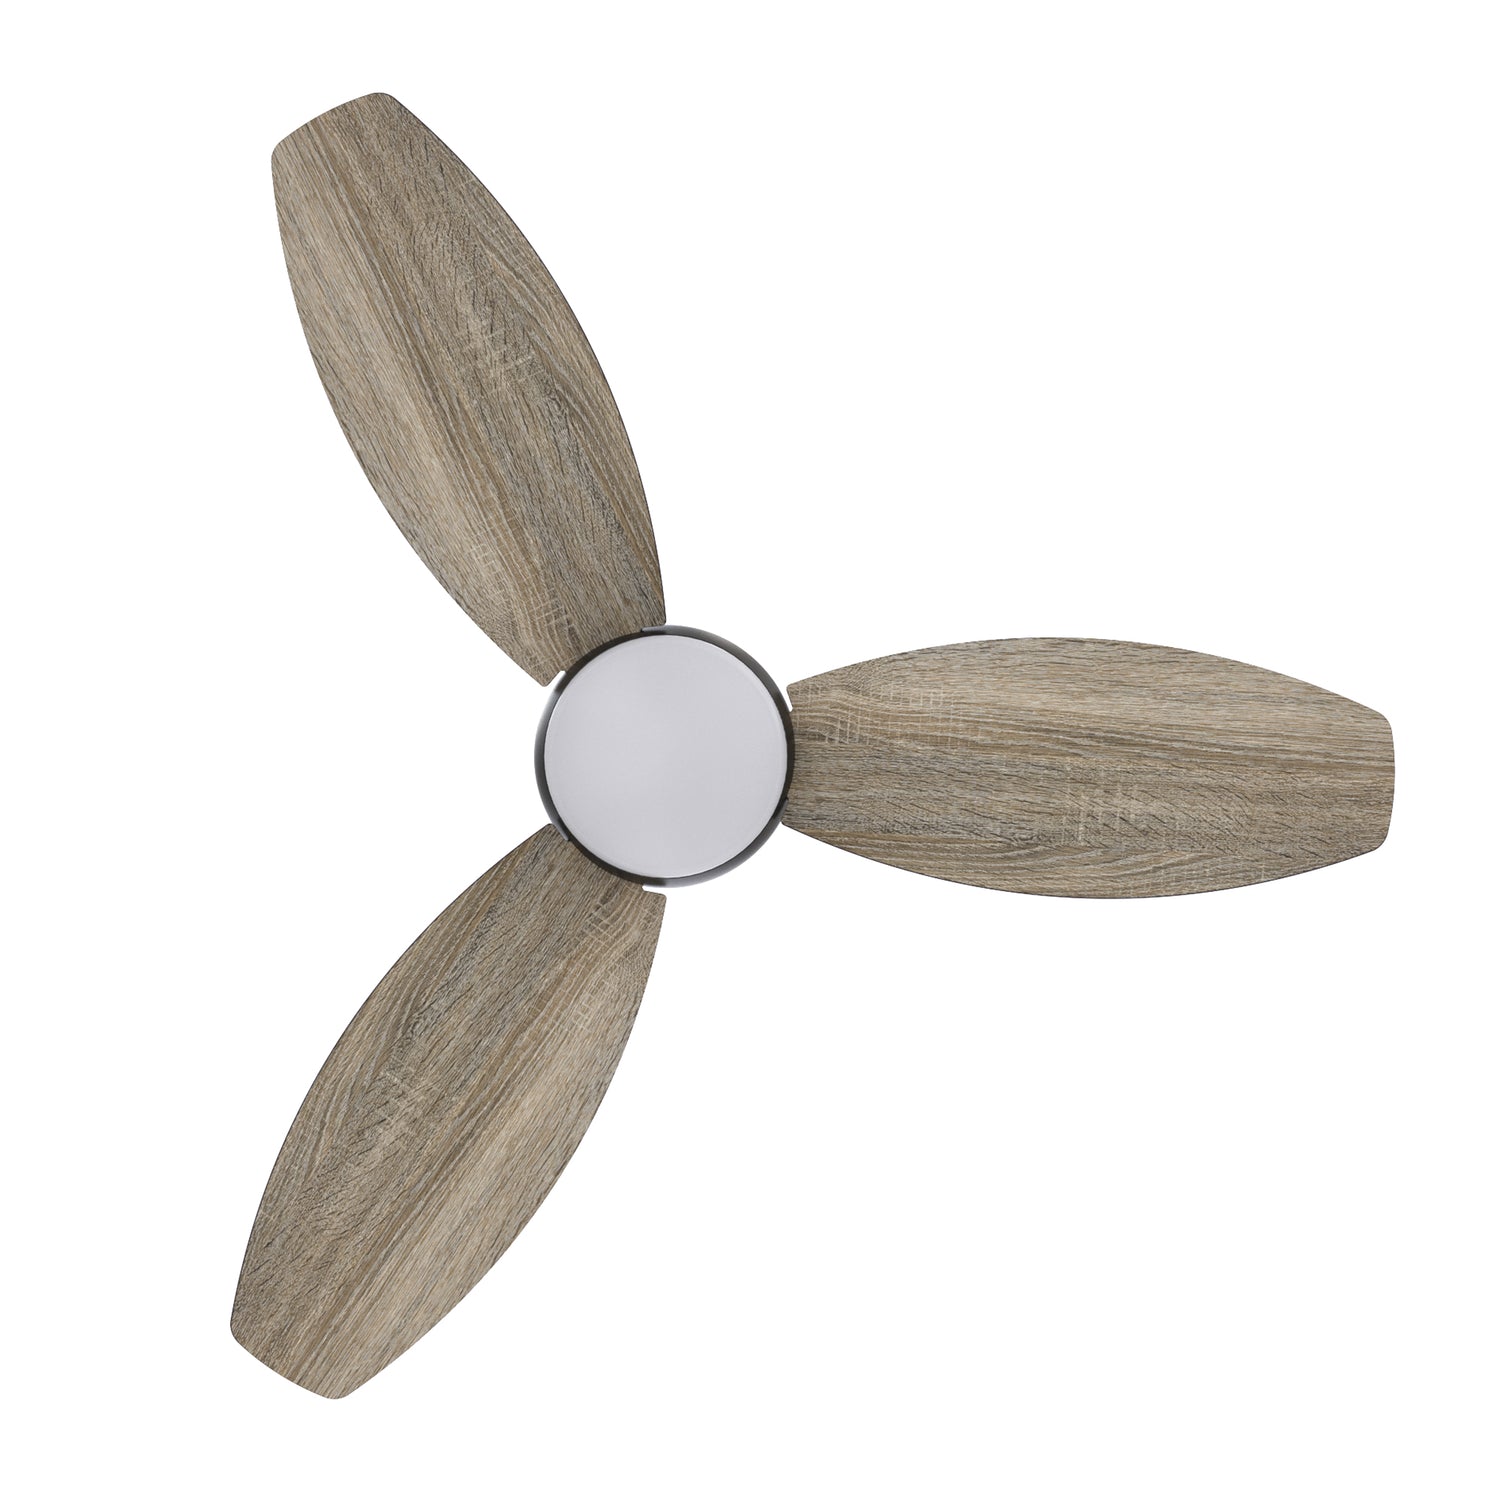 The Smafan Trendsetter Smart Ceiling Fan with 3 blades and a 60-inch blade sweep with a flush mounted motor case and tropical inspired blades. The wide paddle shaped fan blades are elegant Plywood blades. The motor case is a Black finish and one of our few flush mounted DC motor fans 